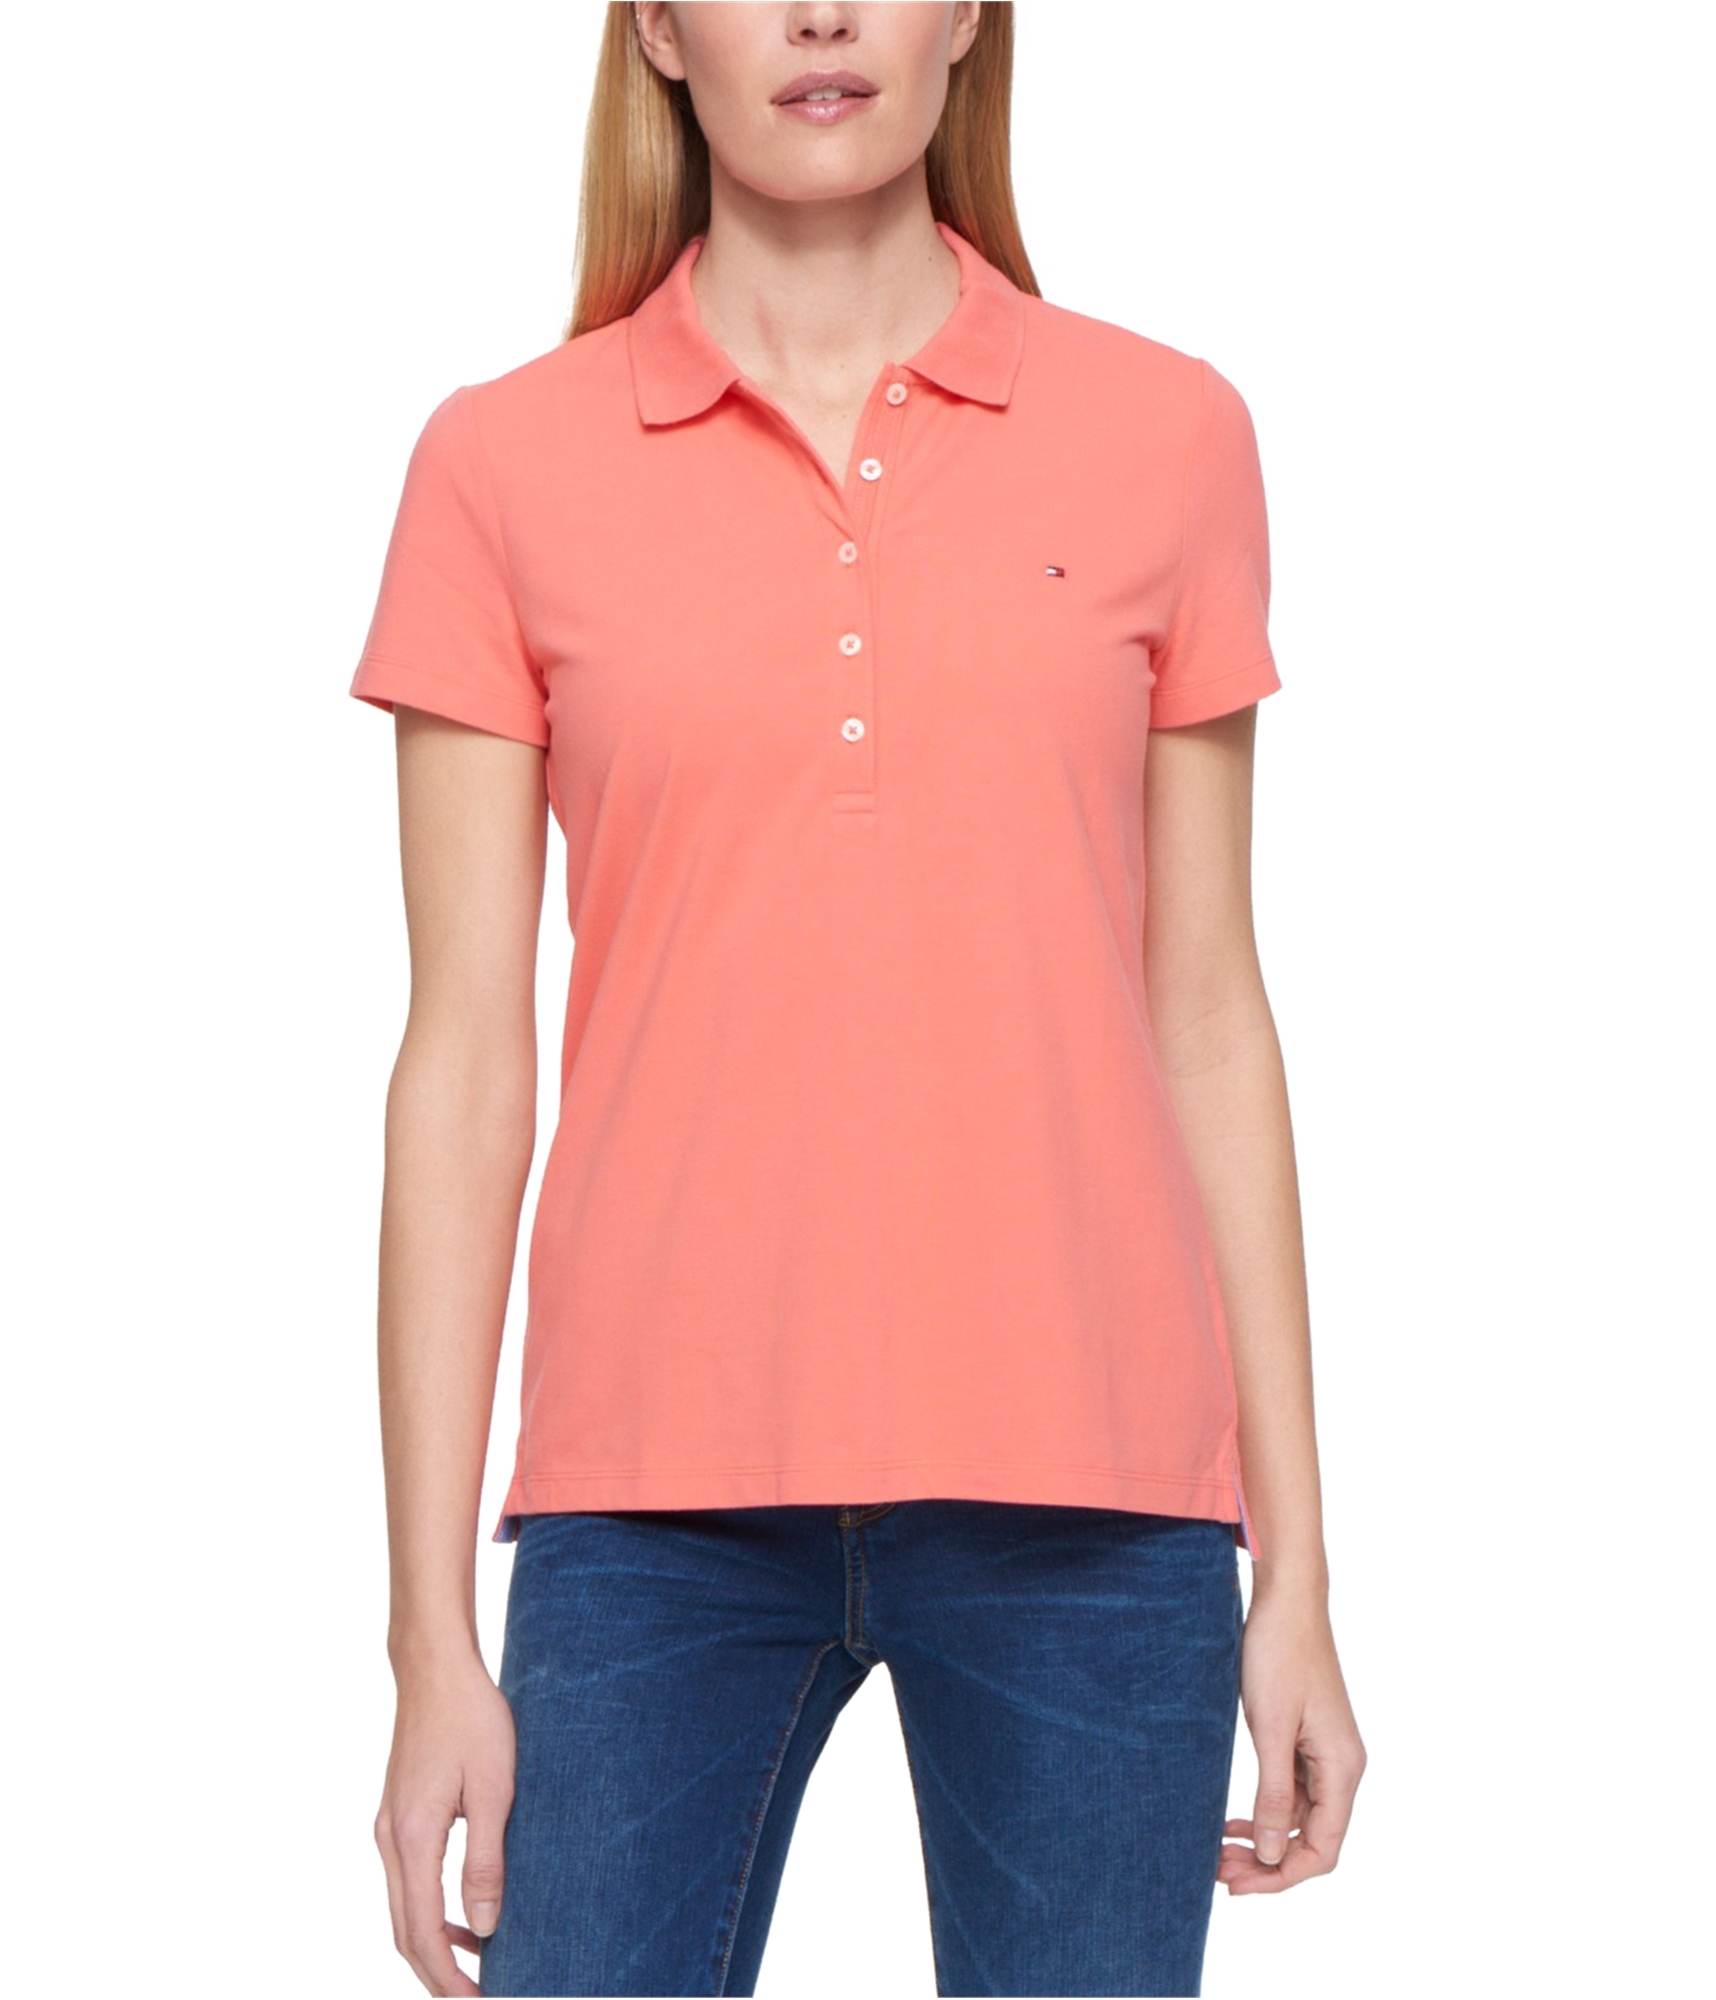 Buy a Womens Tommy Basic Shirt | TagsWeekly.com